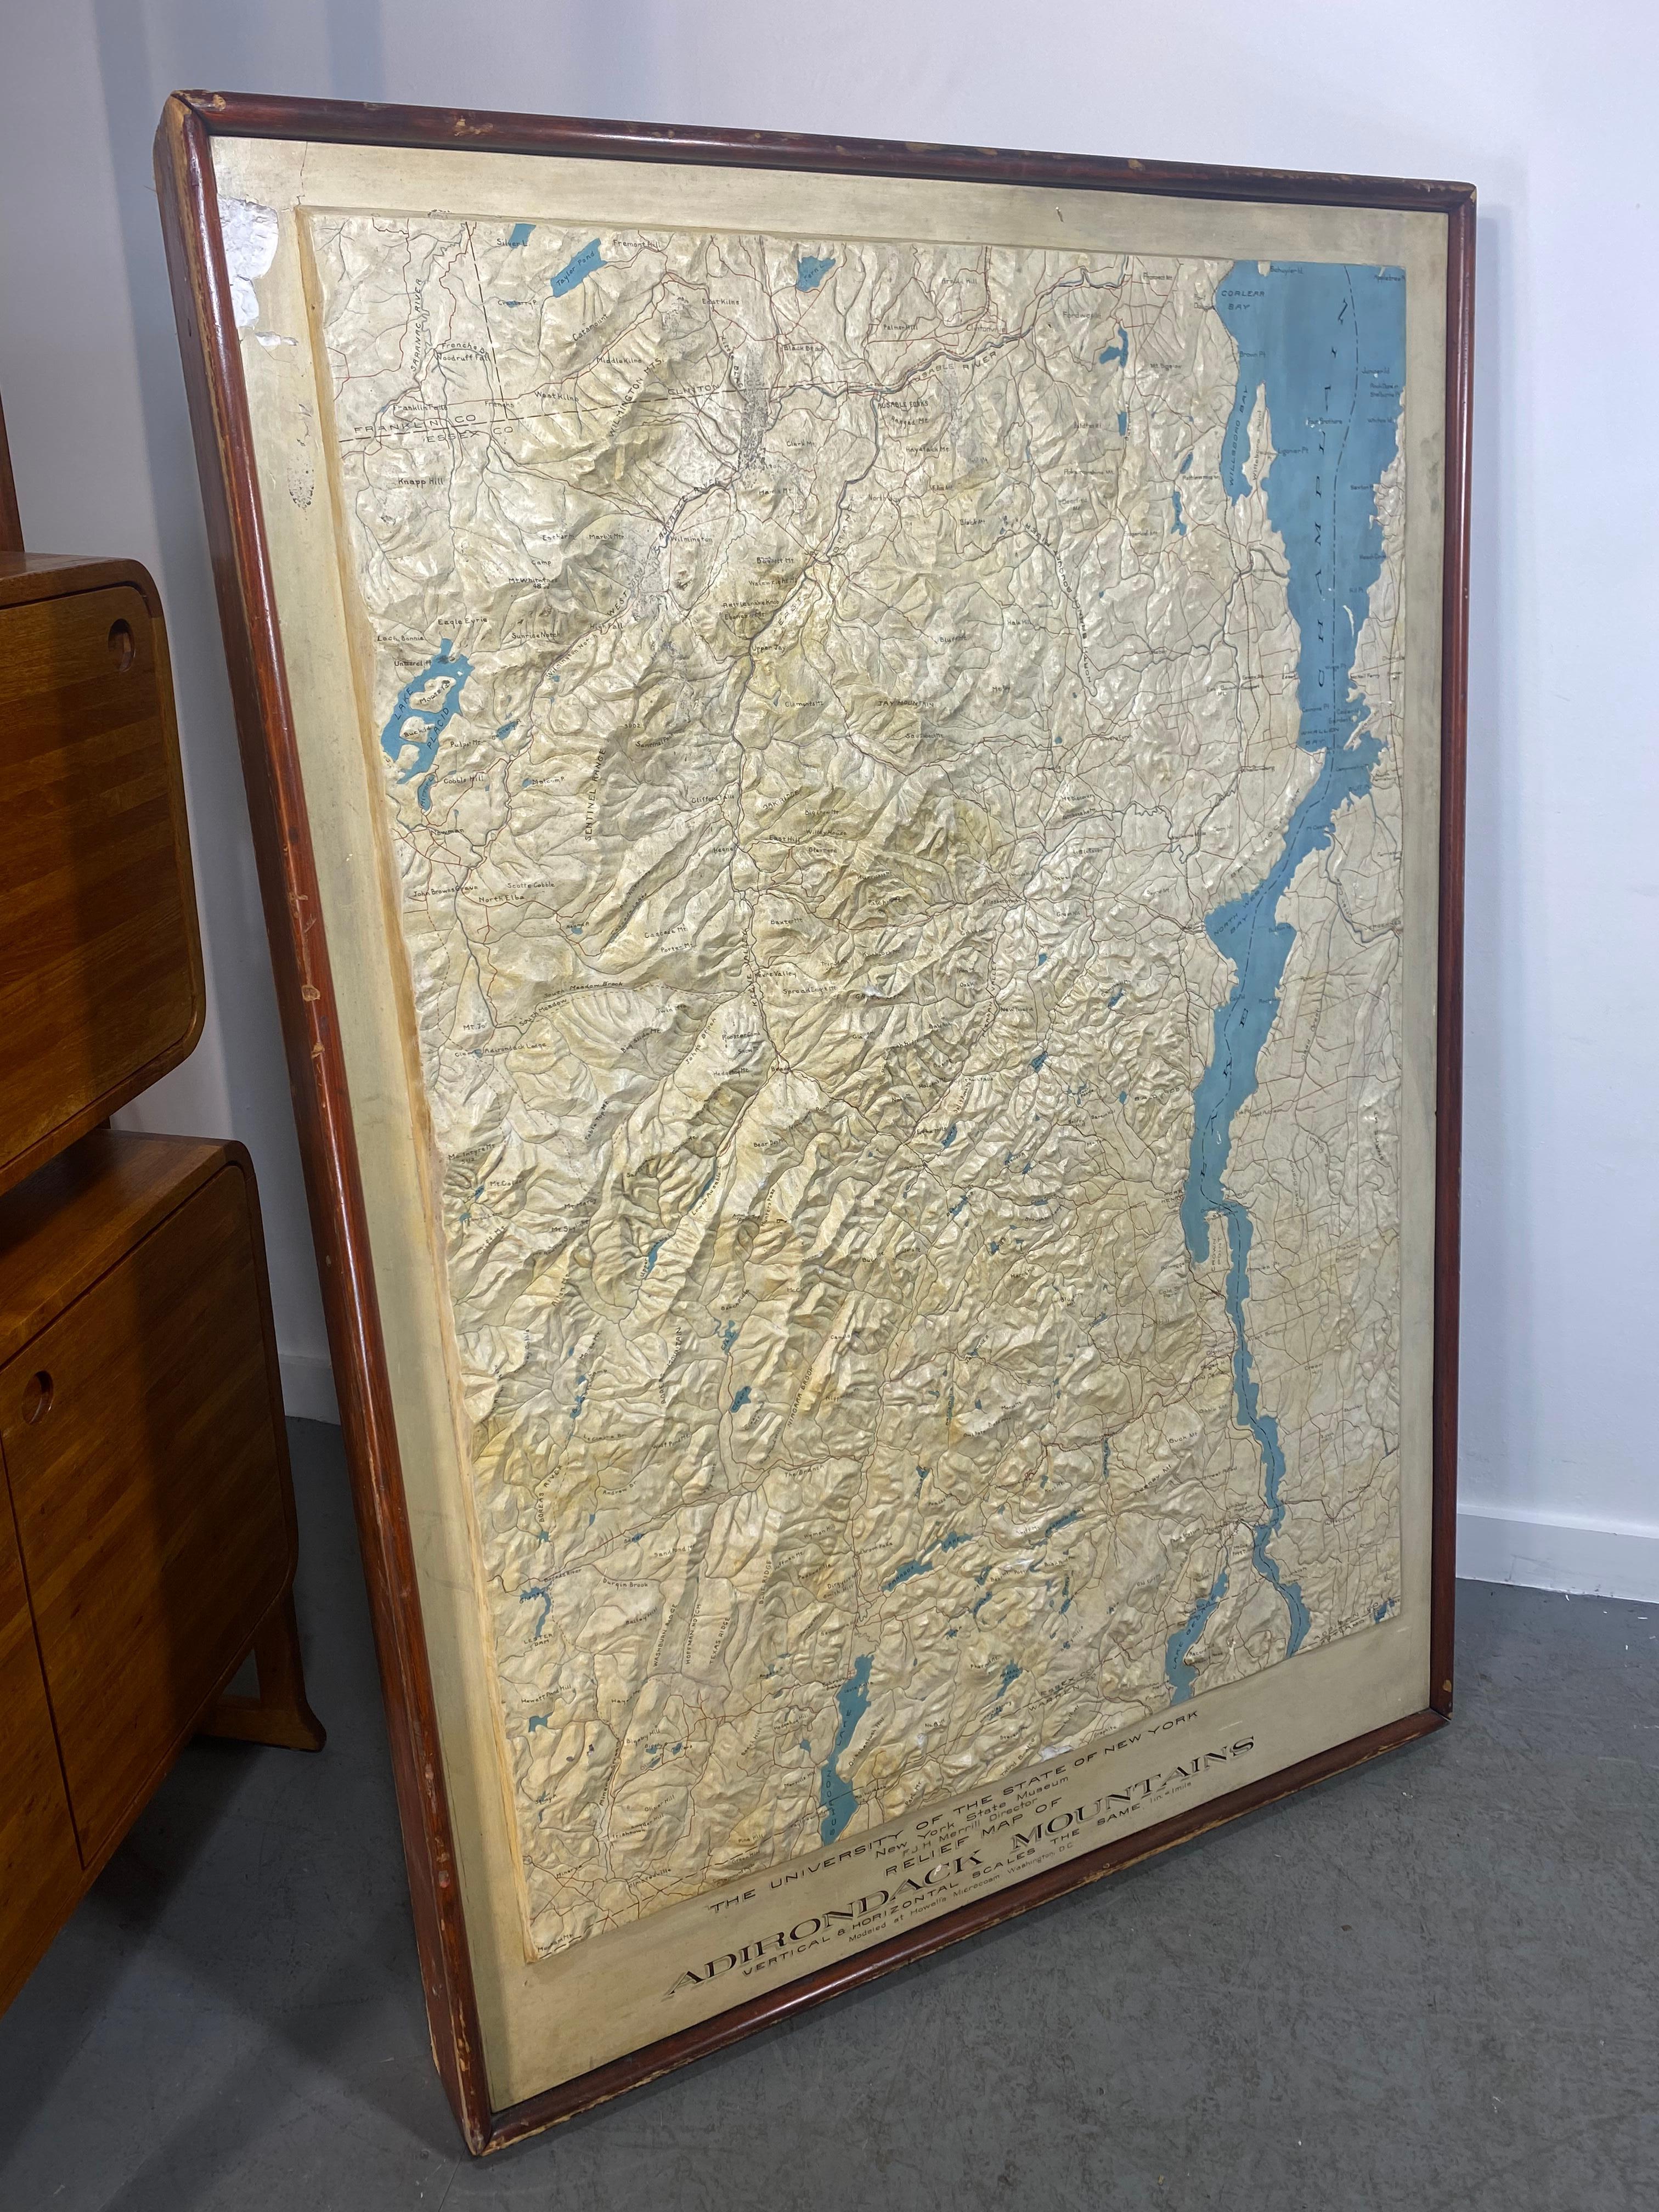 where are the adirondack mountains located on a map